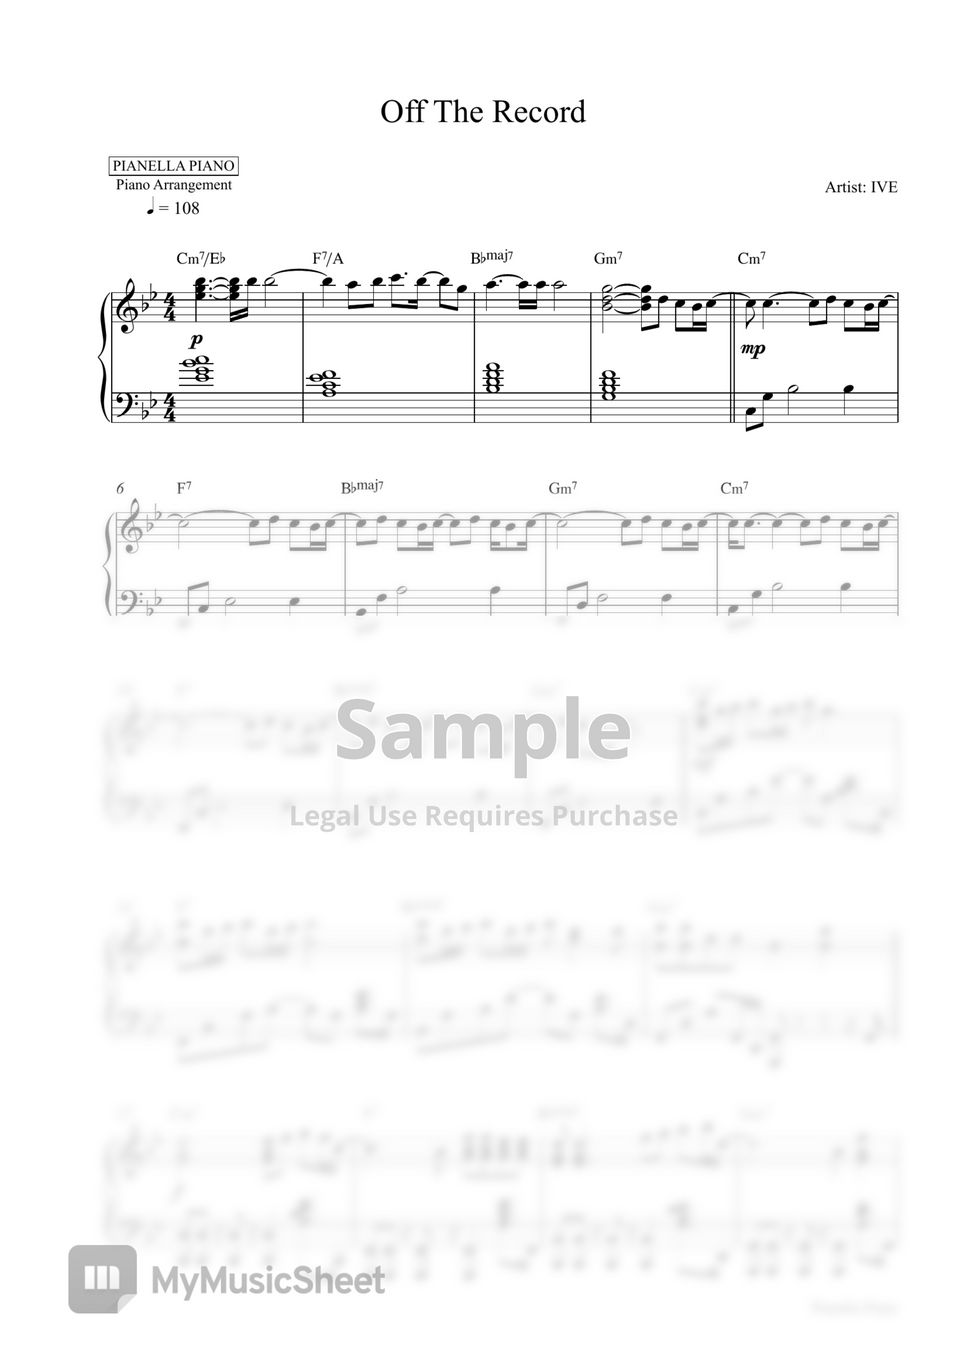 IVE - Off The Record (Piano Sheet) by Pianella Piano